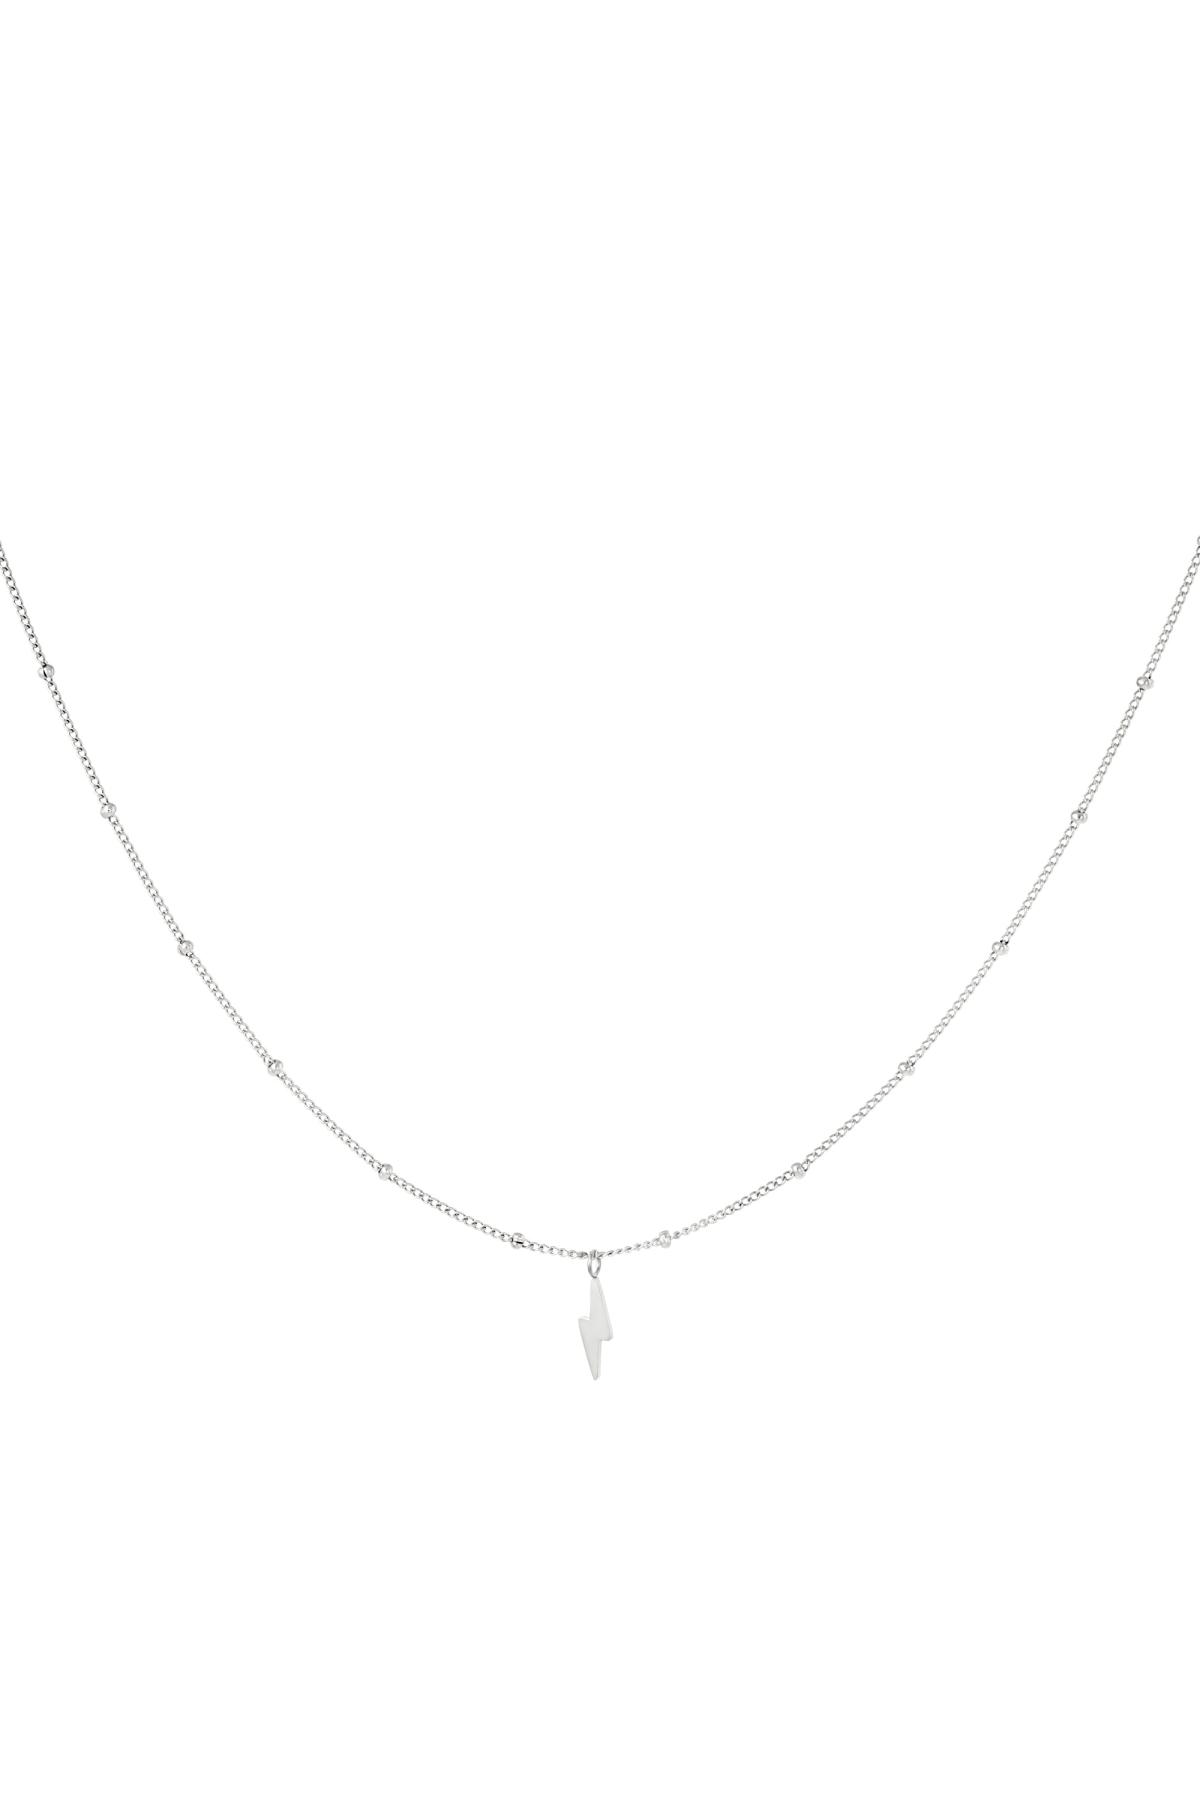 Necklace bolt of lightning Silver Stainless Steel h5 